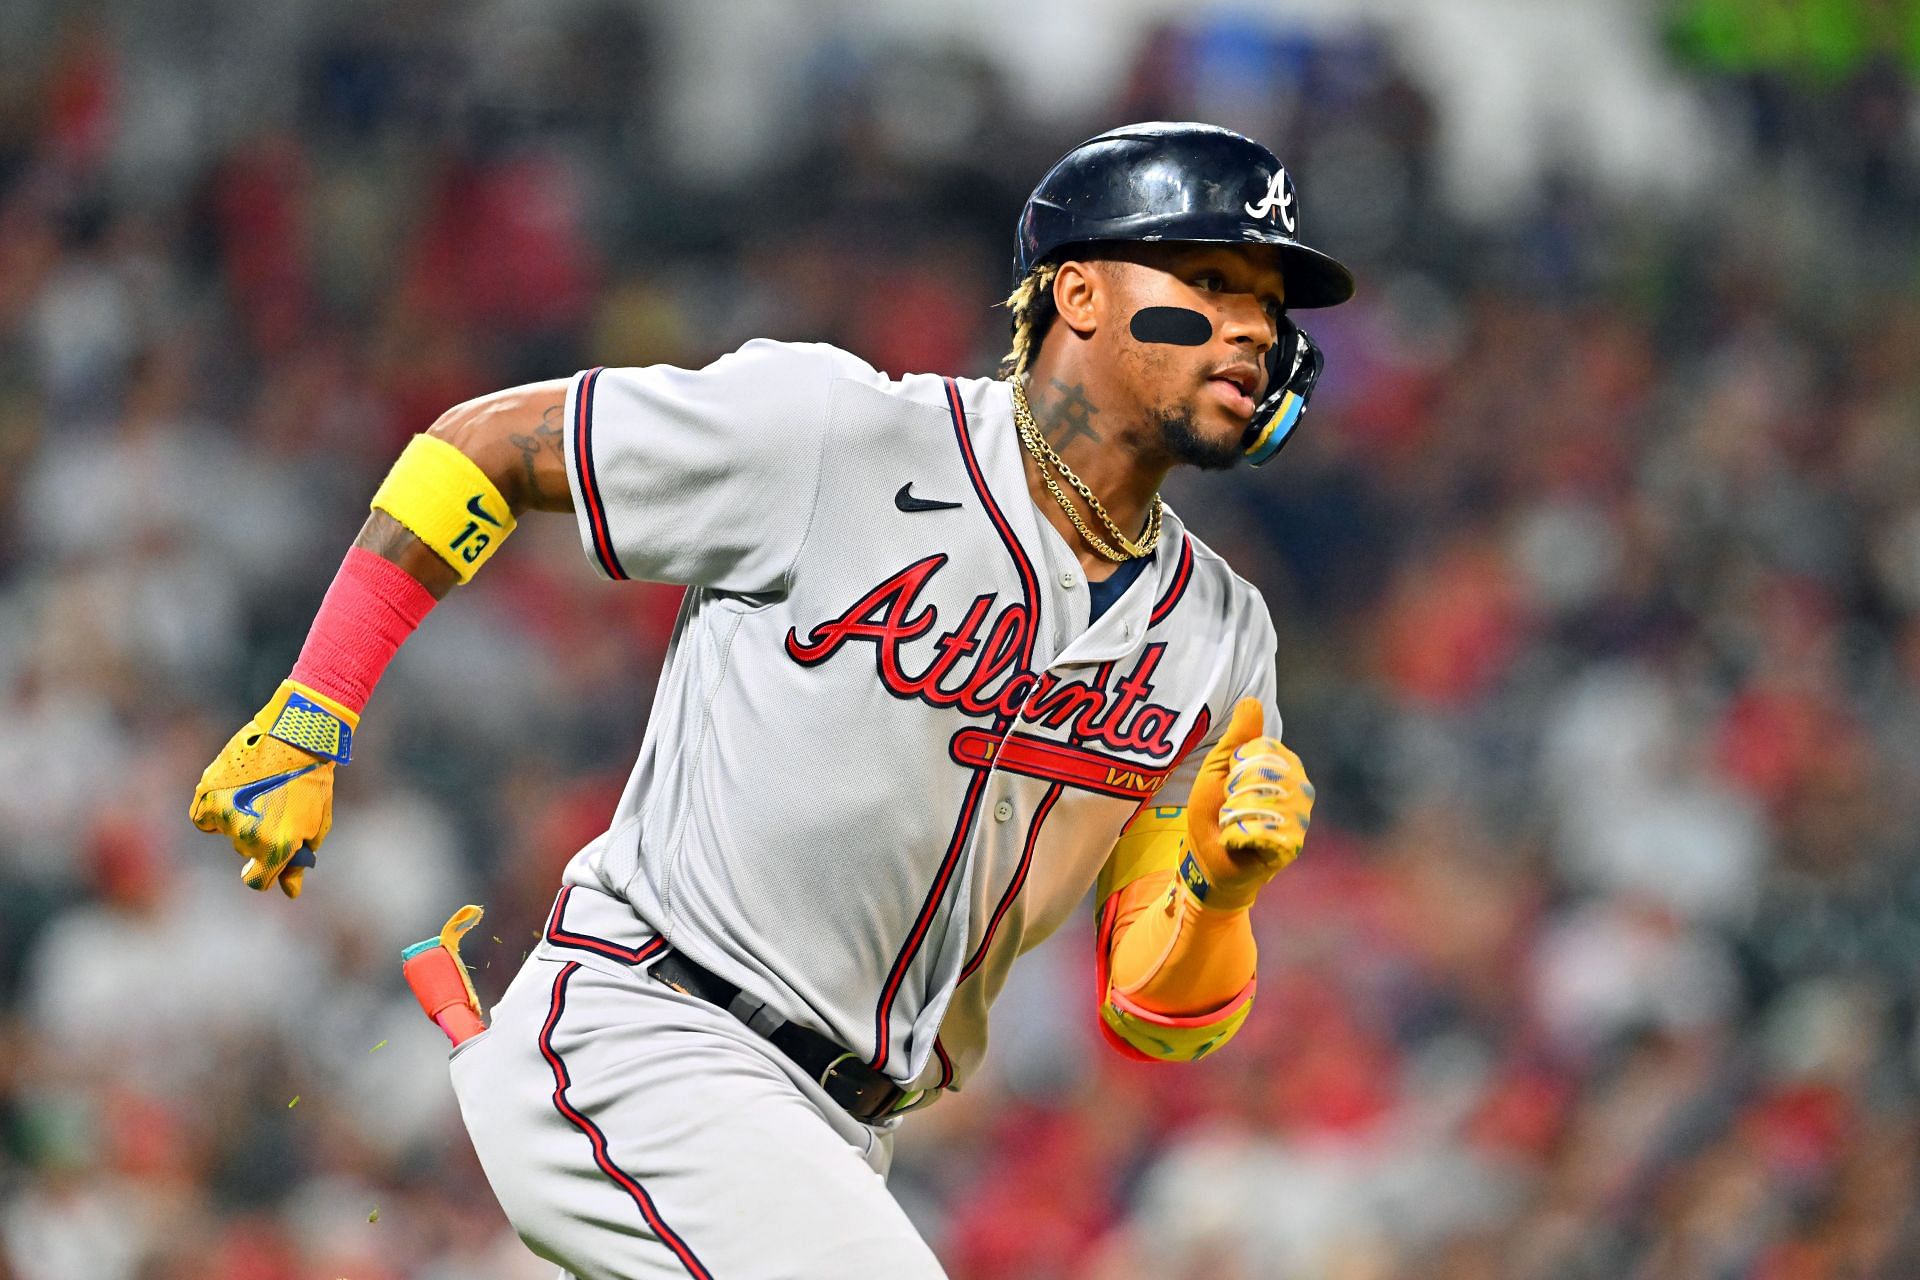 Ronald Acuna Jr. of the Atlanta Braves runs out a single against the Cleveland Guardians at Progressive Field